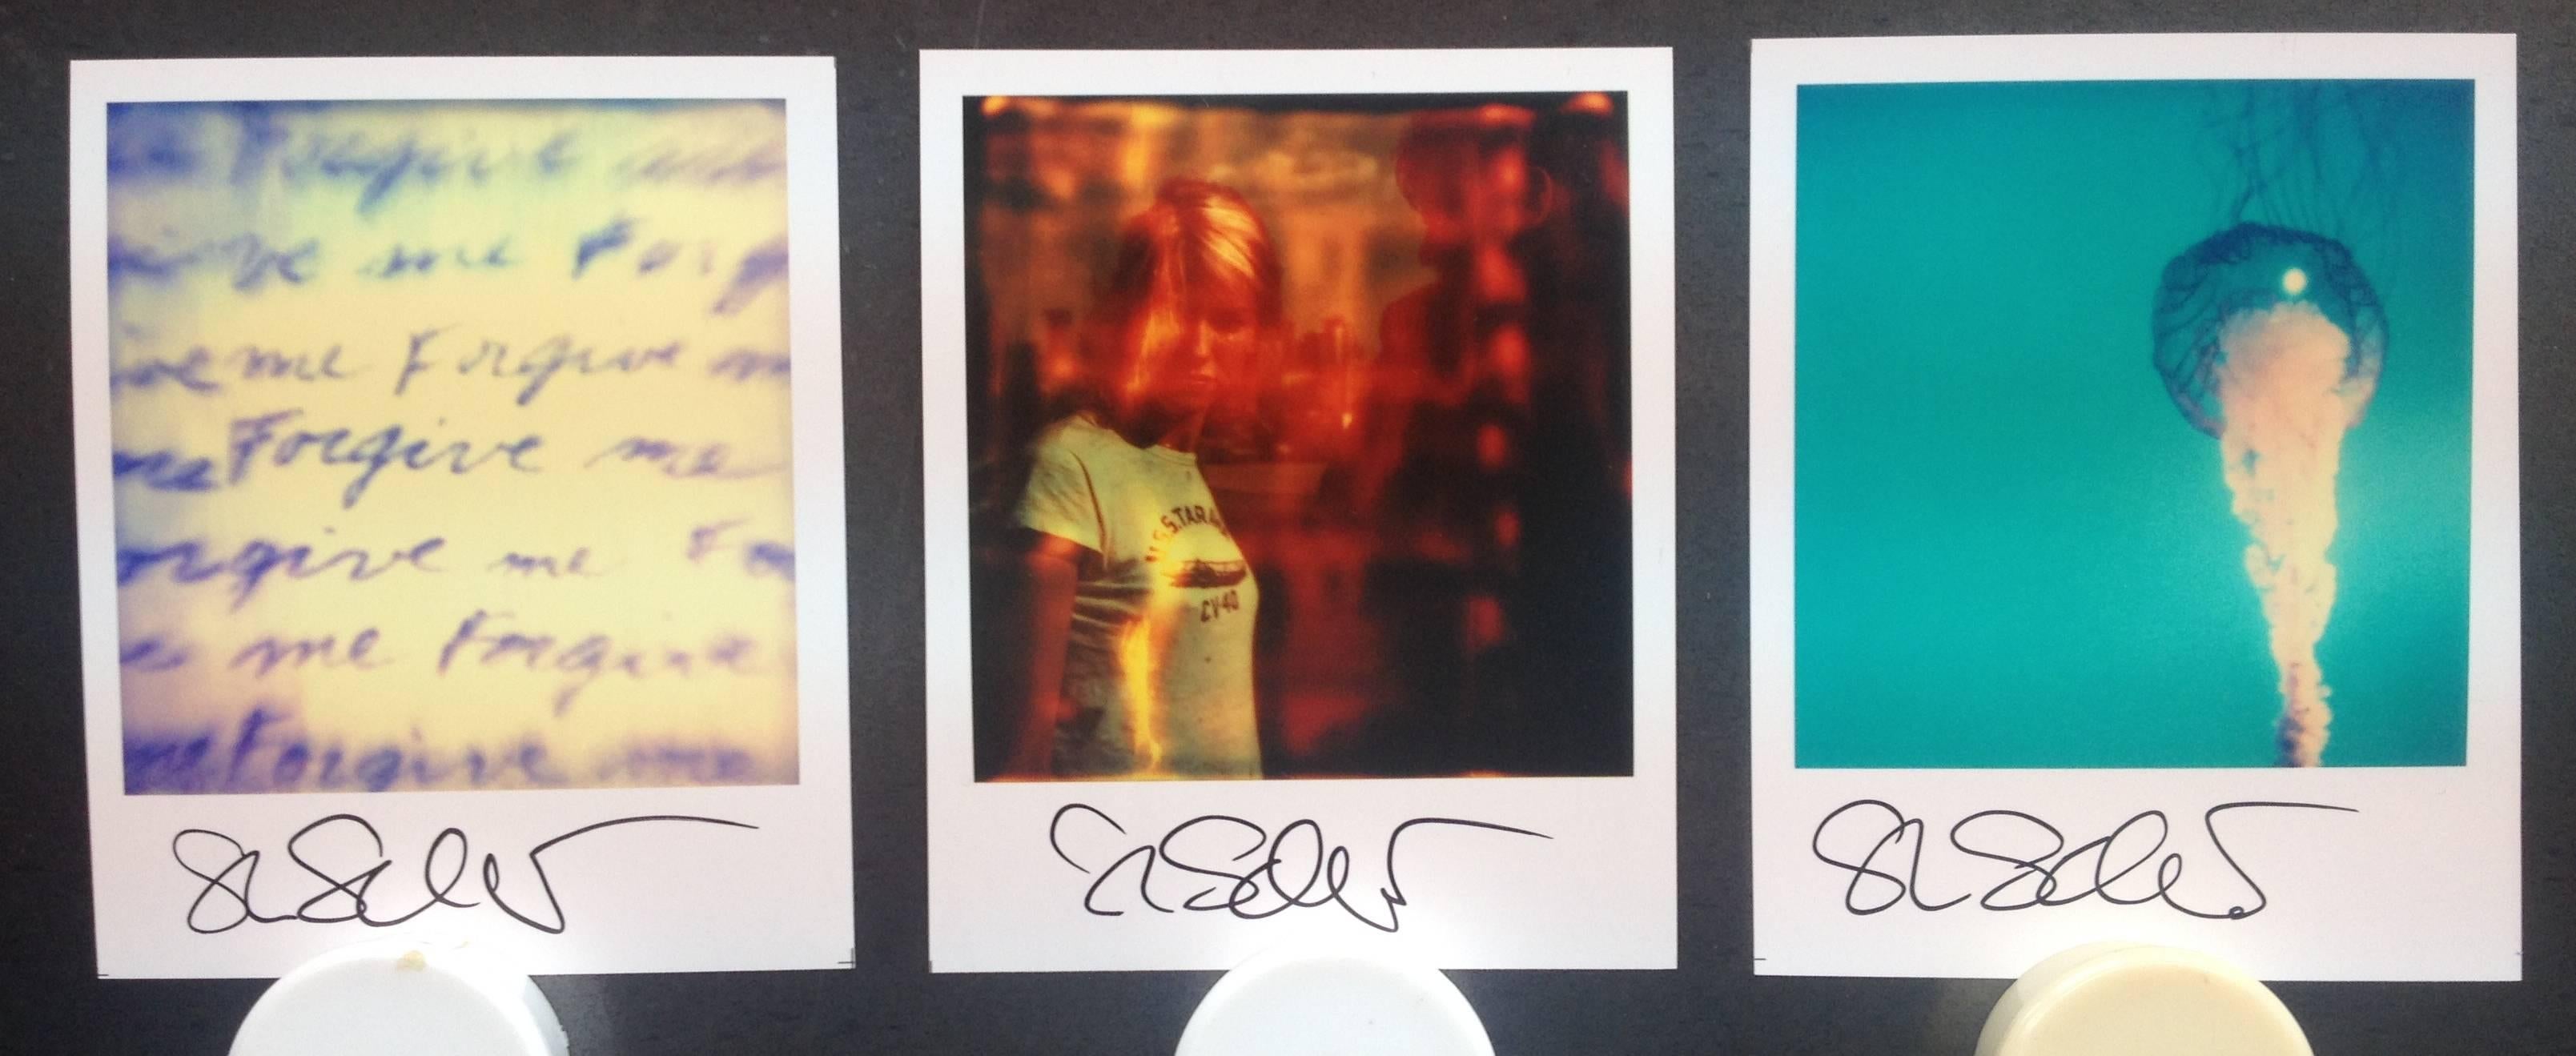 3 Stefanie Schneider's Minis
from the movie Stay: 'Forgive me', 'Lila', 'Jellyfish'
signed in front, not mounted
Lambda digital Color Photographs based on a Polaroid

Polaroid sized open Editions 1999-2013
each 10.7 x 8.8cm (Image 7.9x7.7cm)

What